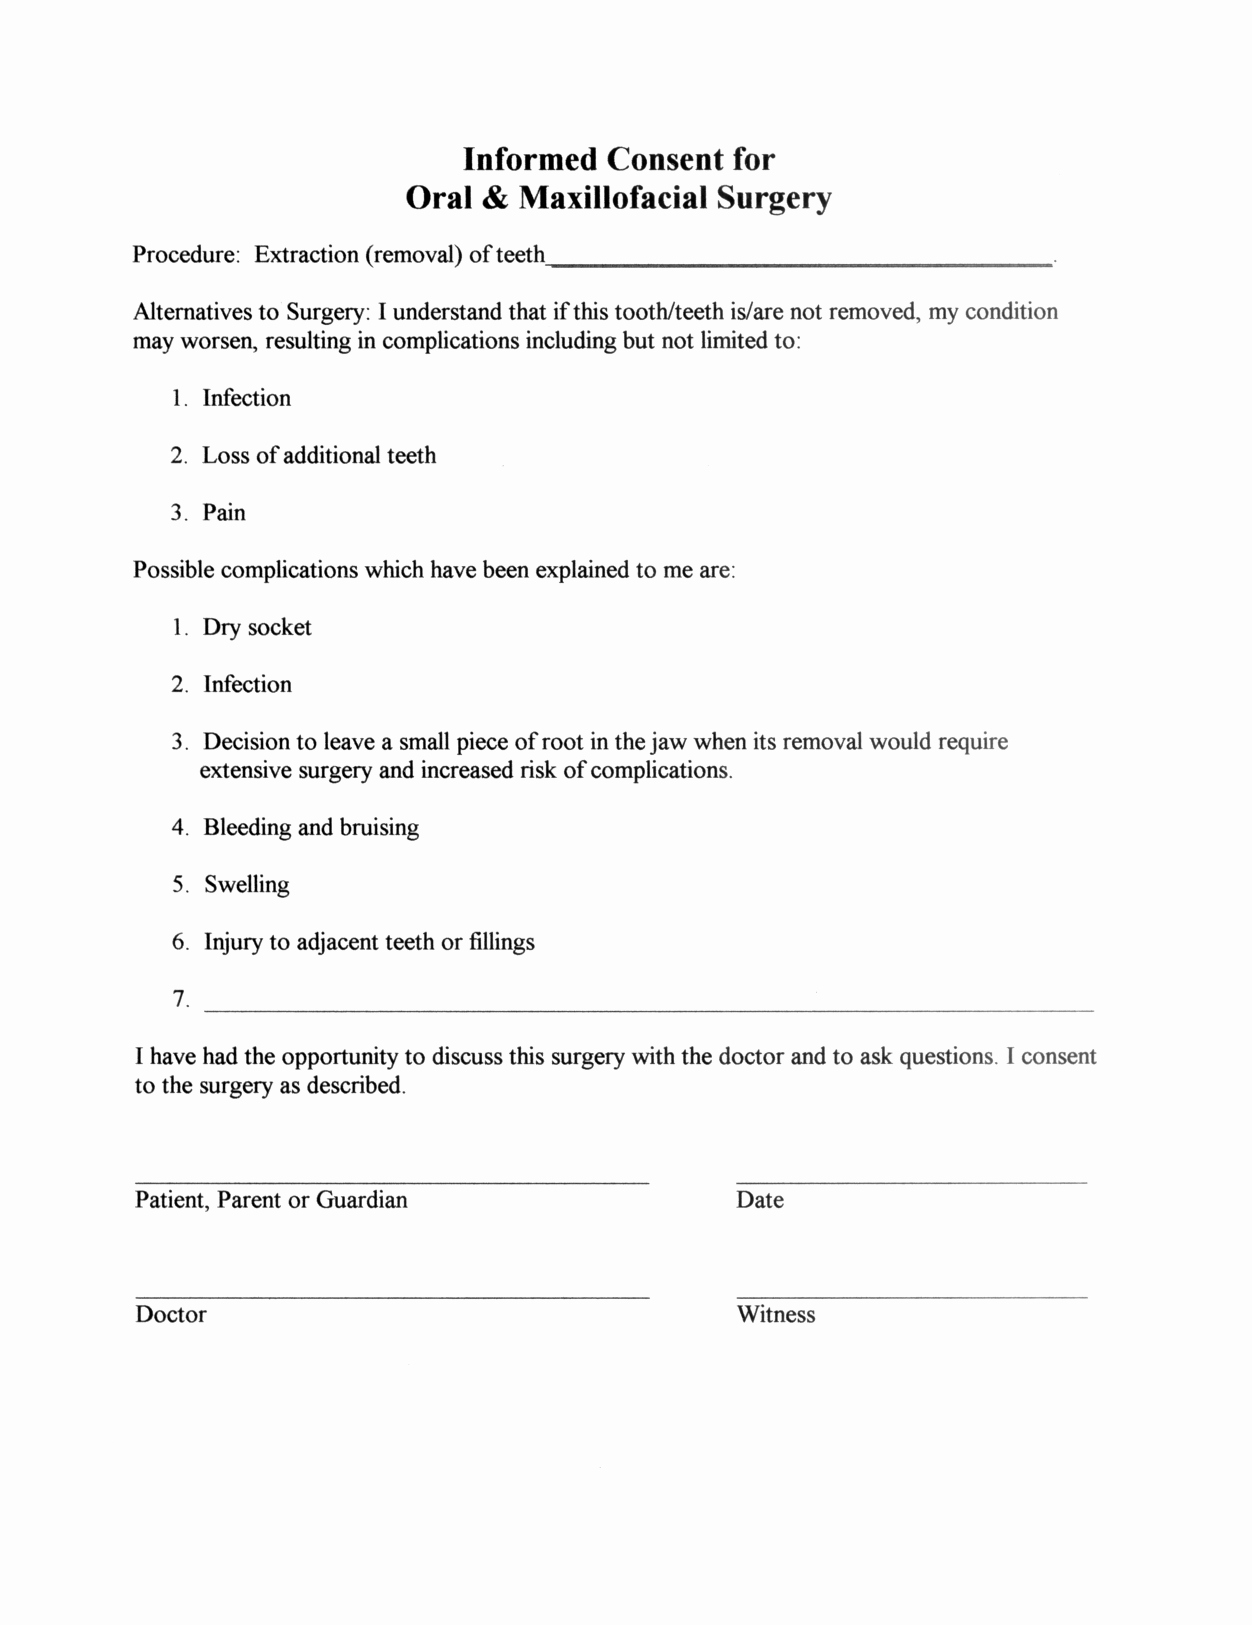 Dental Treatment Consent form Template Awesome Surgery Informed Consent form Template